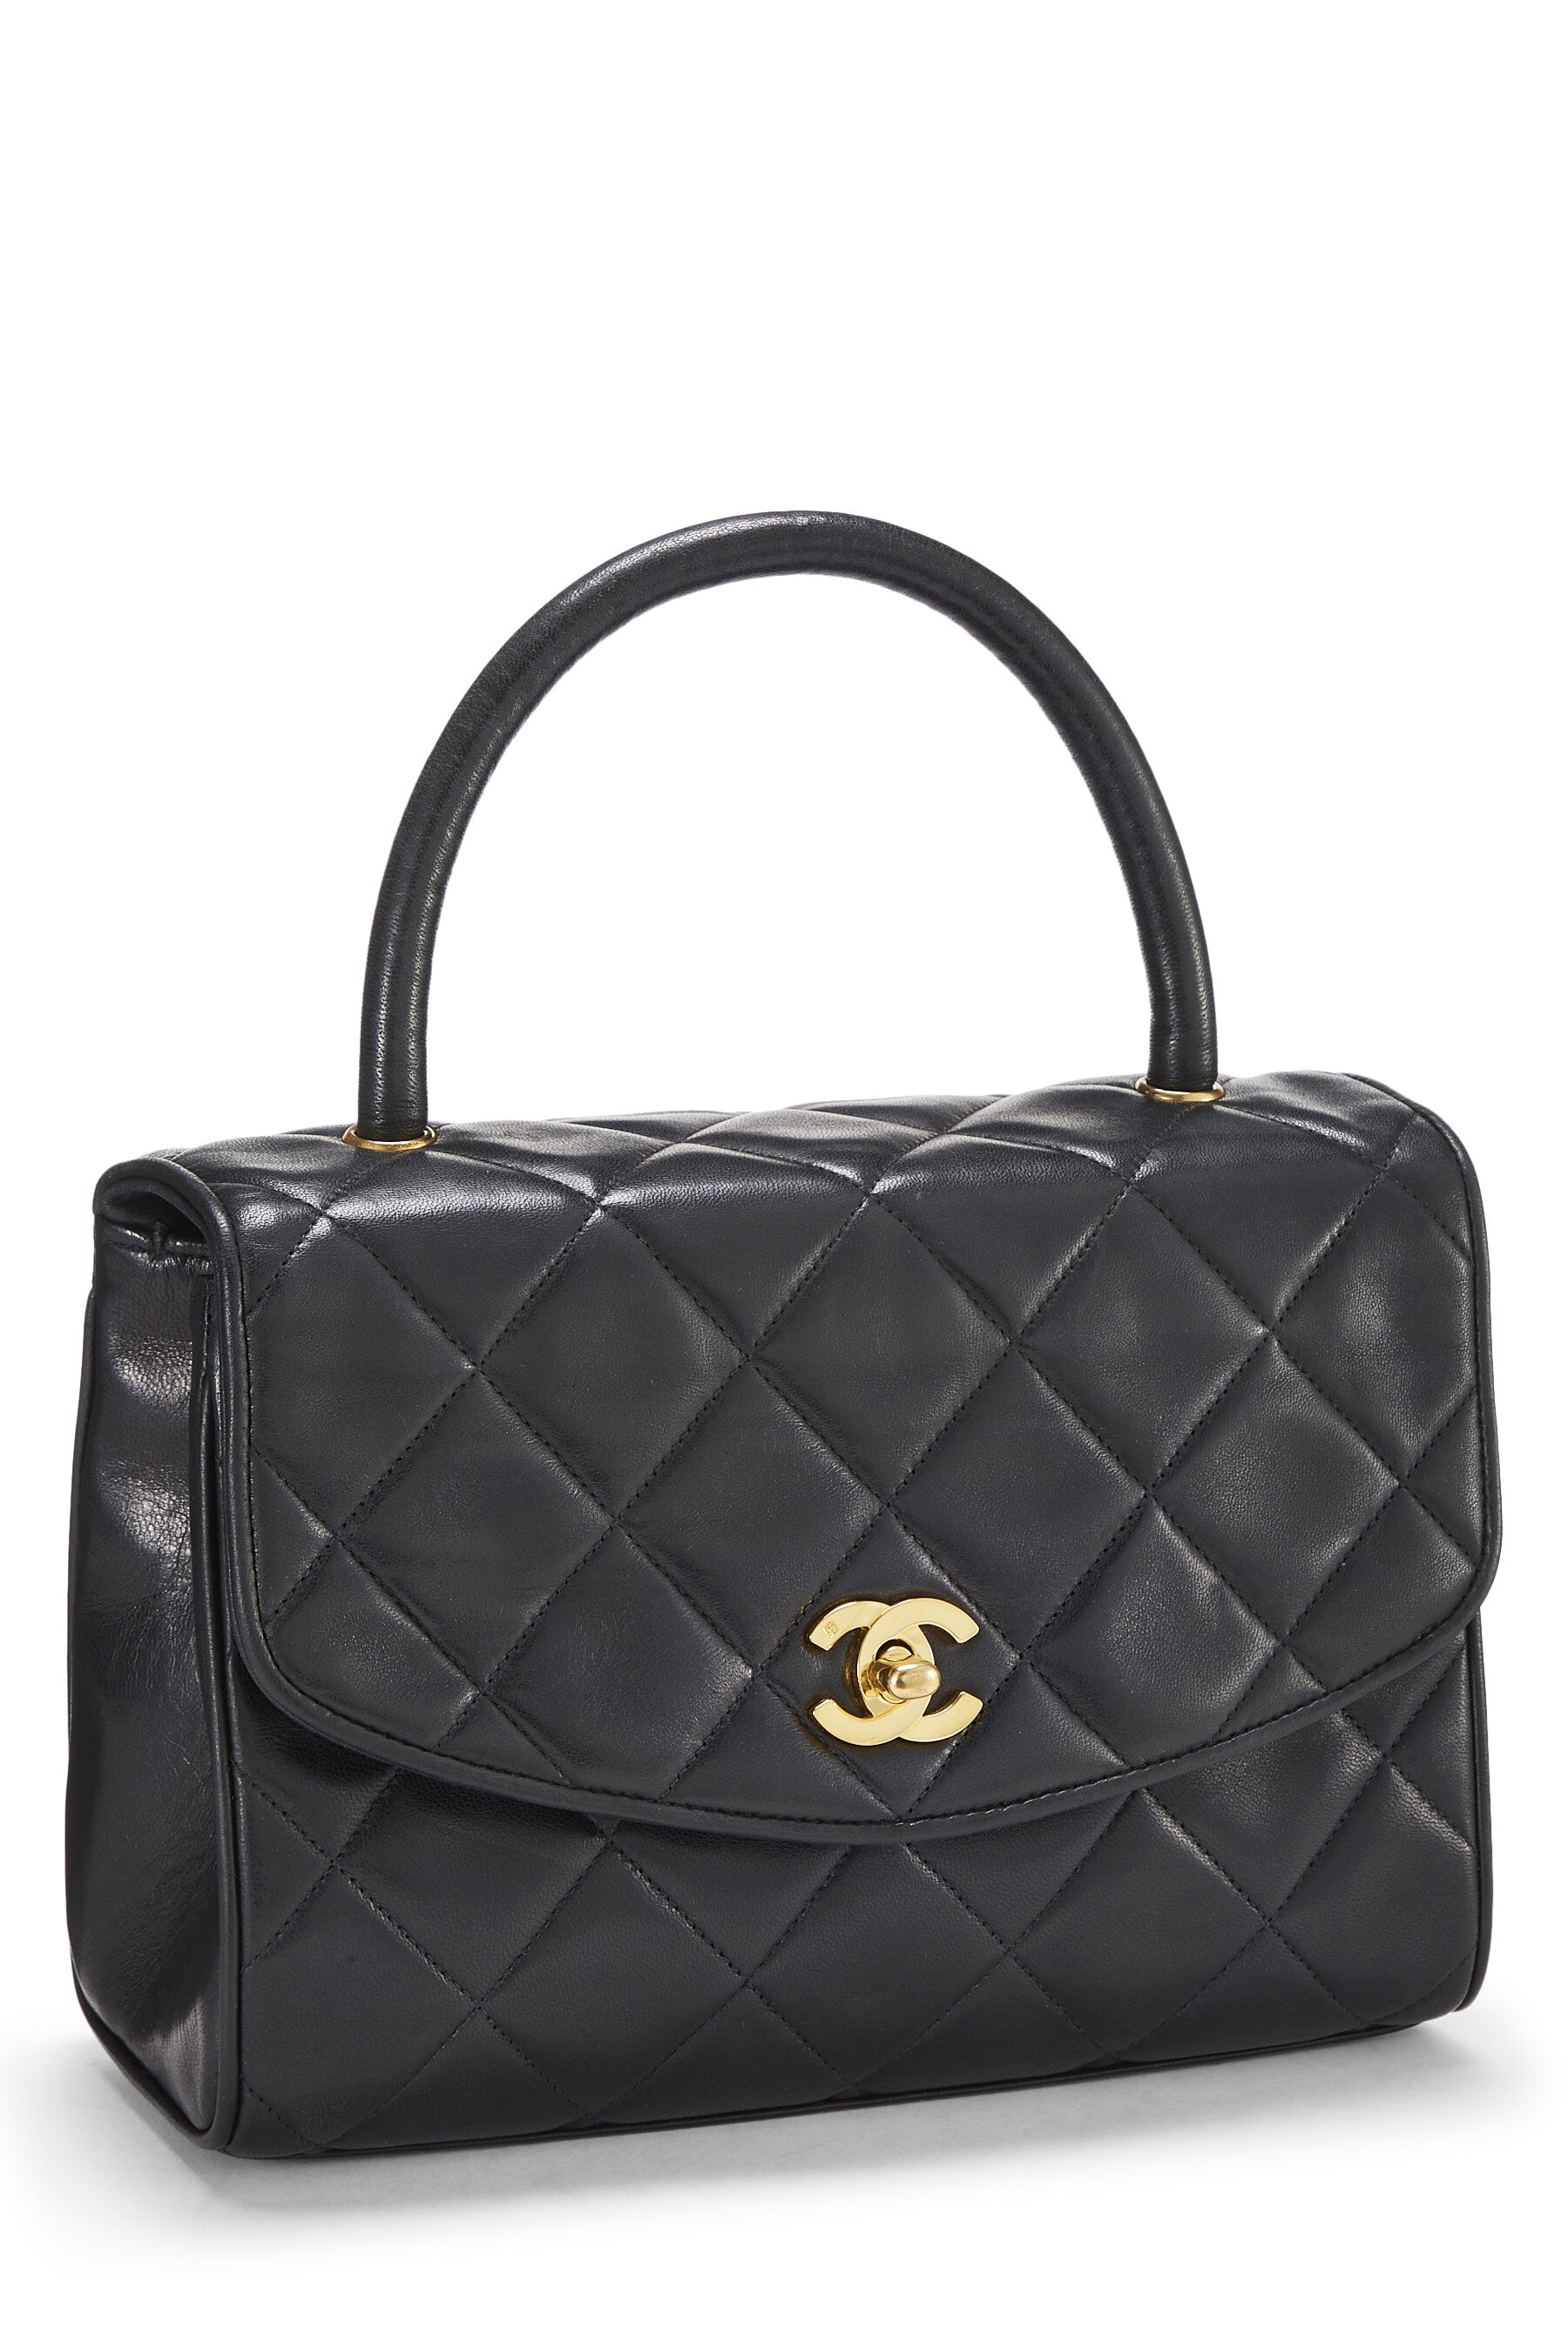 Chanel - Black Quilted Lambskin Top Handle Flap Bag